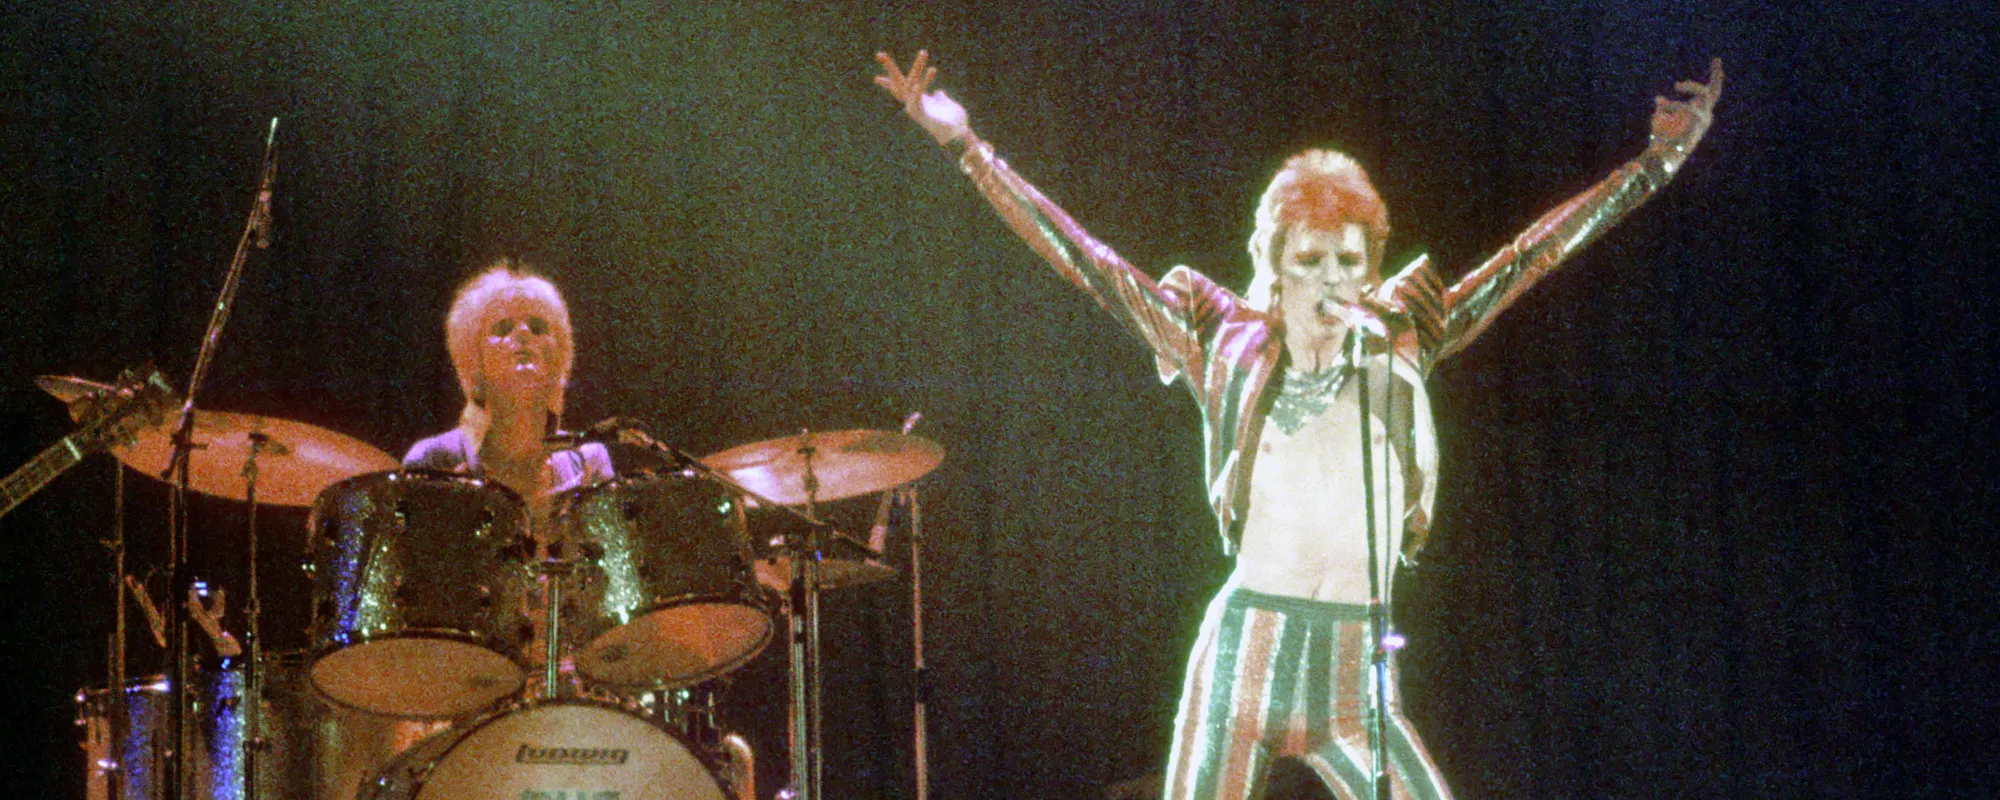 Ranking the 5 Best Songs on ‘The Rise and Fall of Ziggy Stardust and the Spiders from Mars’ by David Bowie